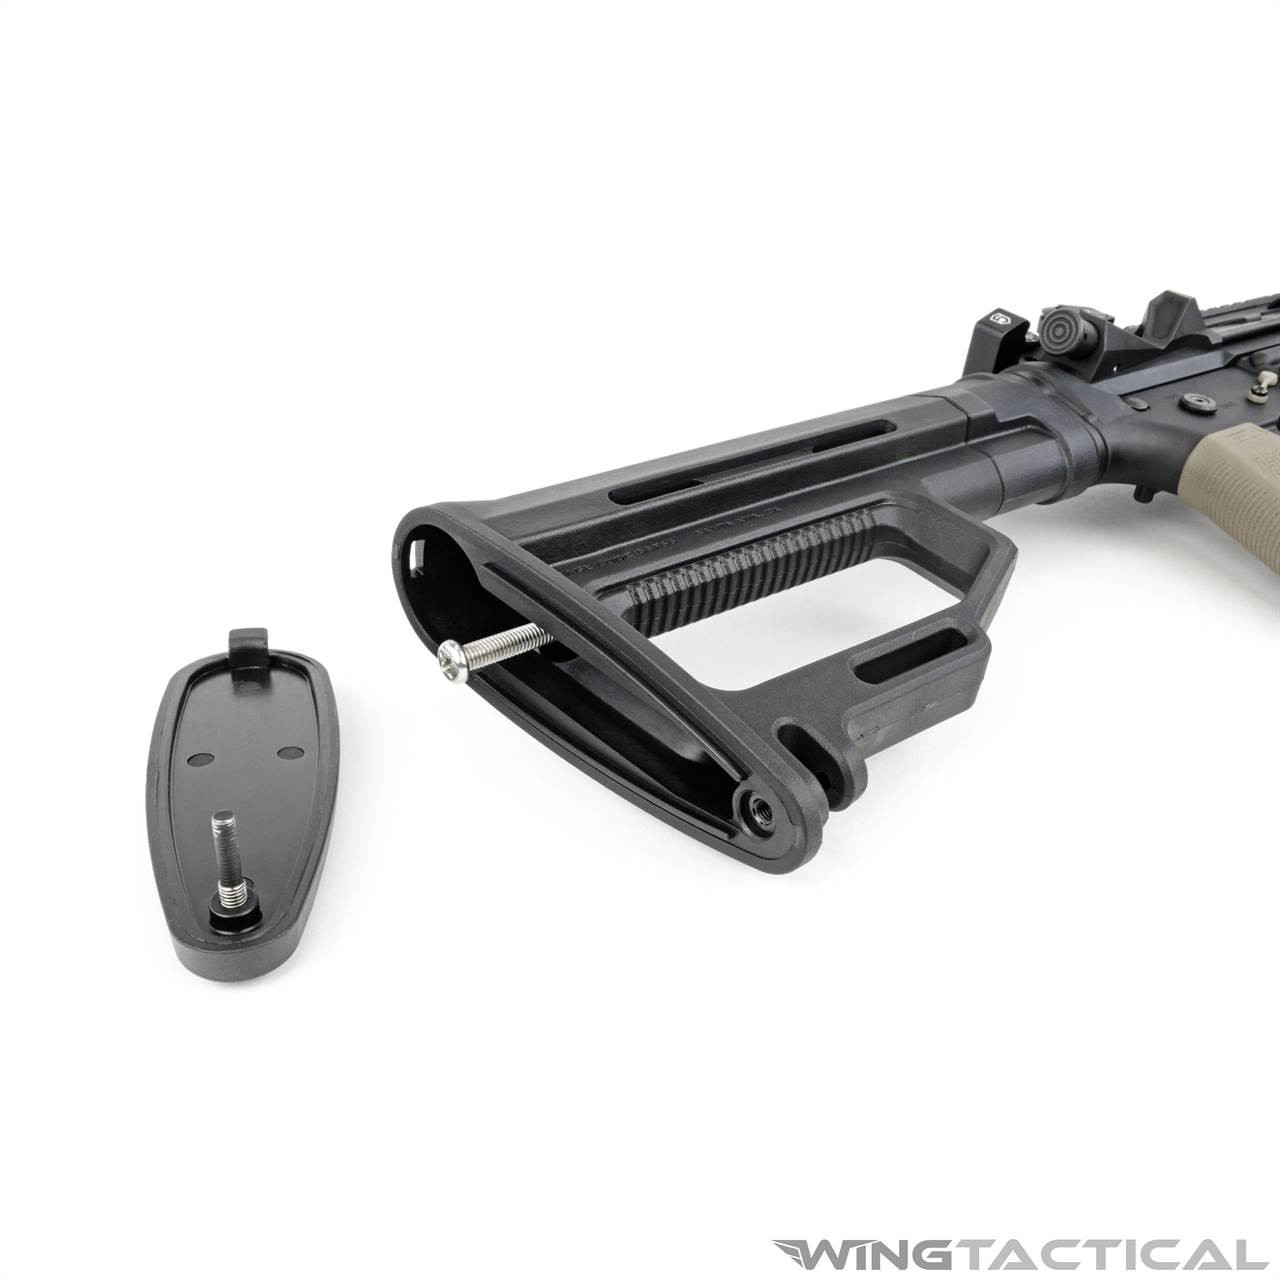 Strike Industries Viper Modular AR Fixed Stock | Wing Tactical